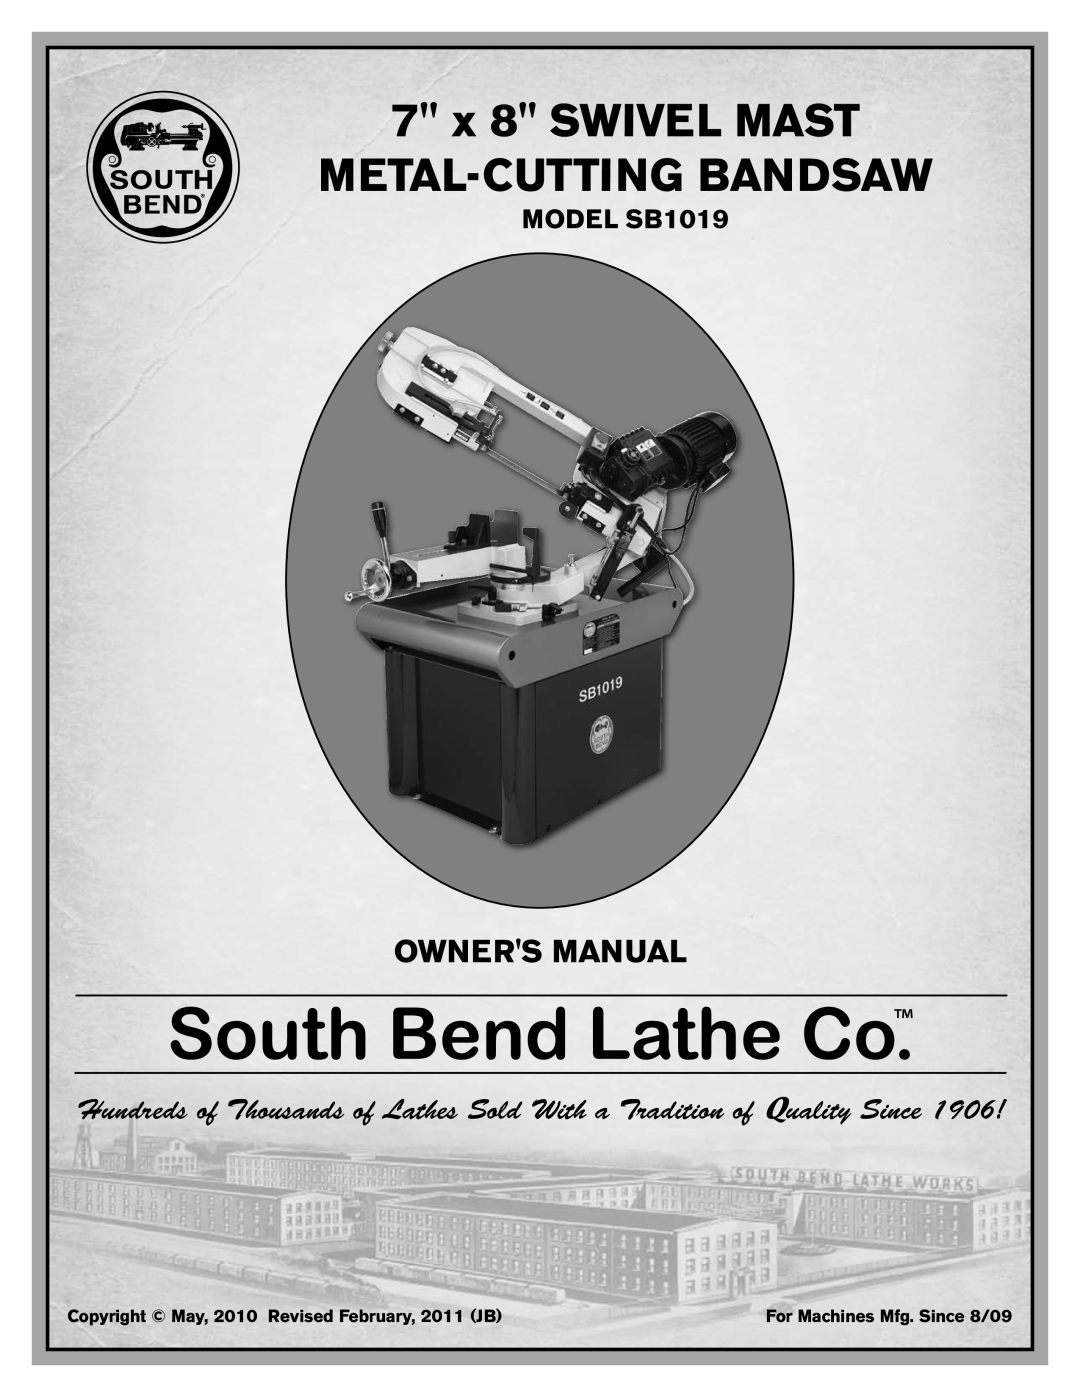 Southbend owner manual Owners Manual, 7 x 8 SWIVEL MAST METAL-CUTTING BANDSAW, MODEL SB1019 